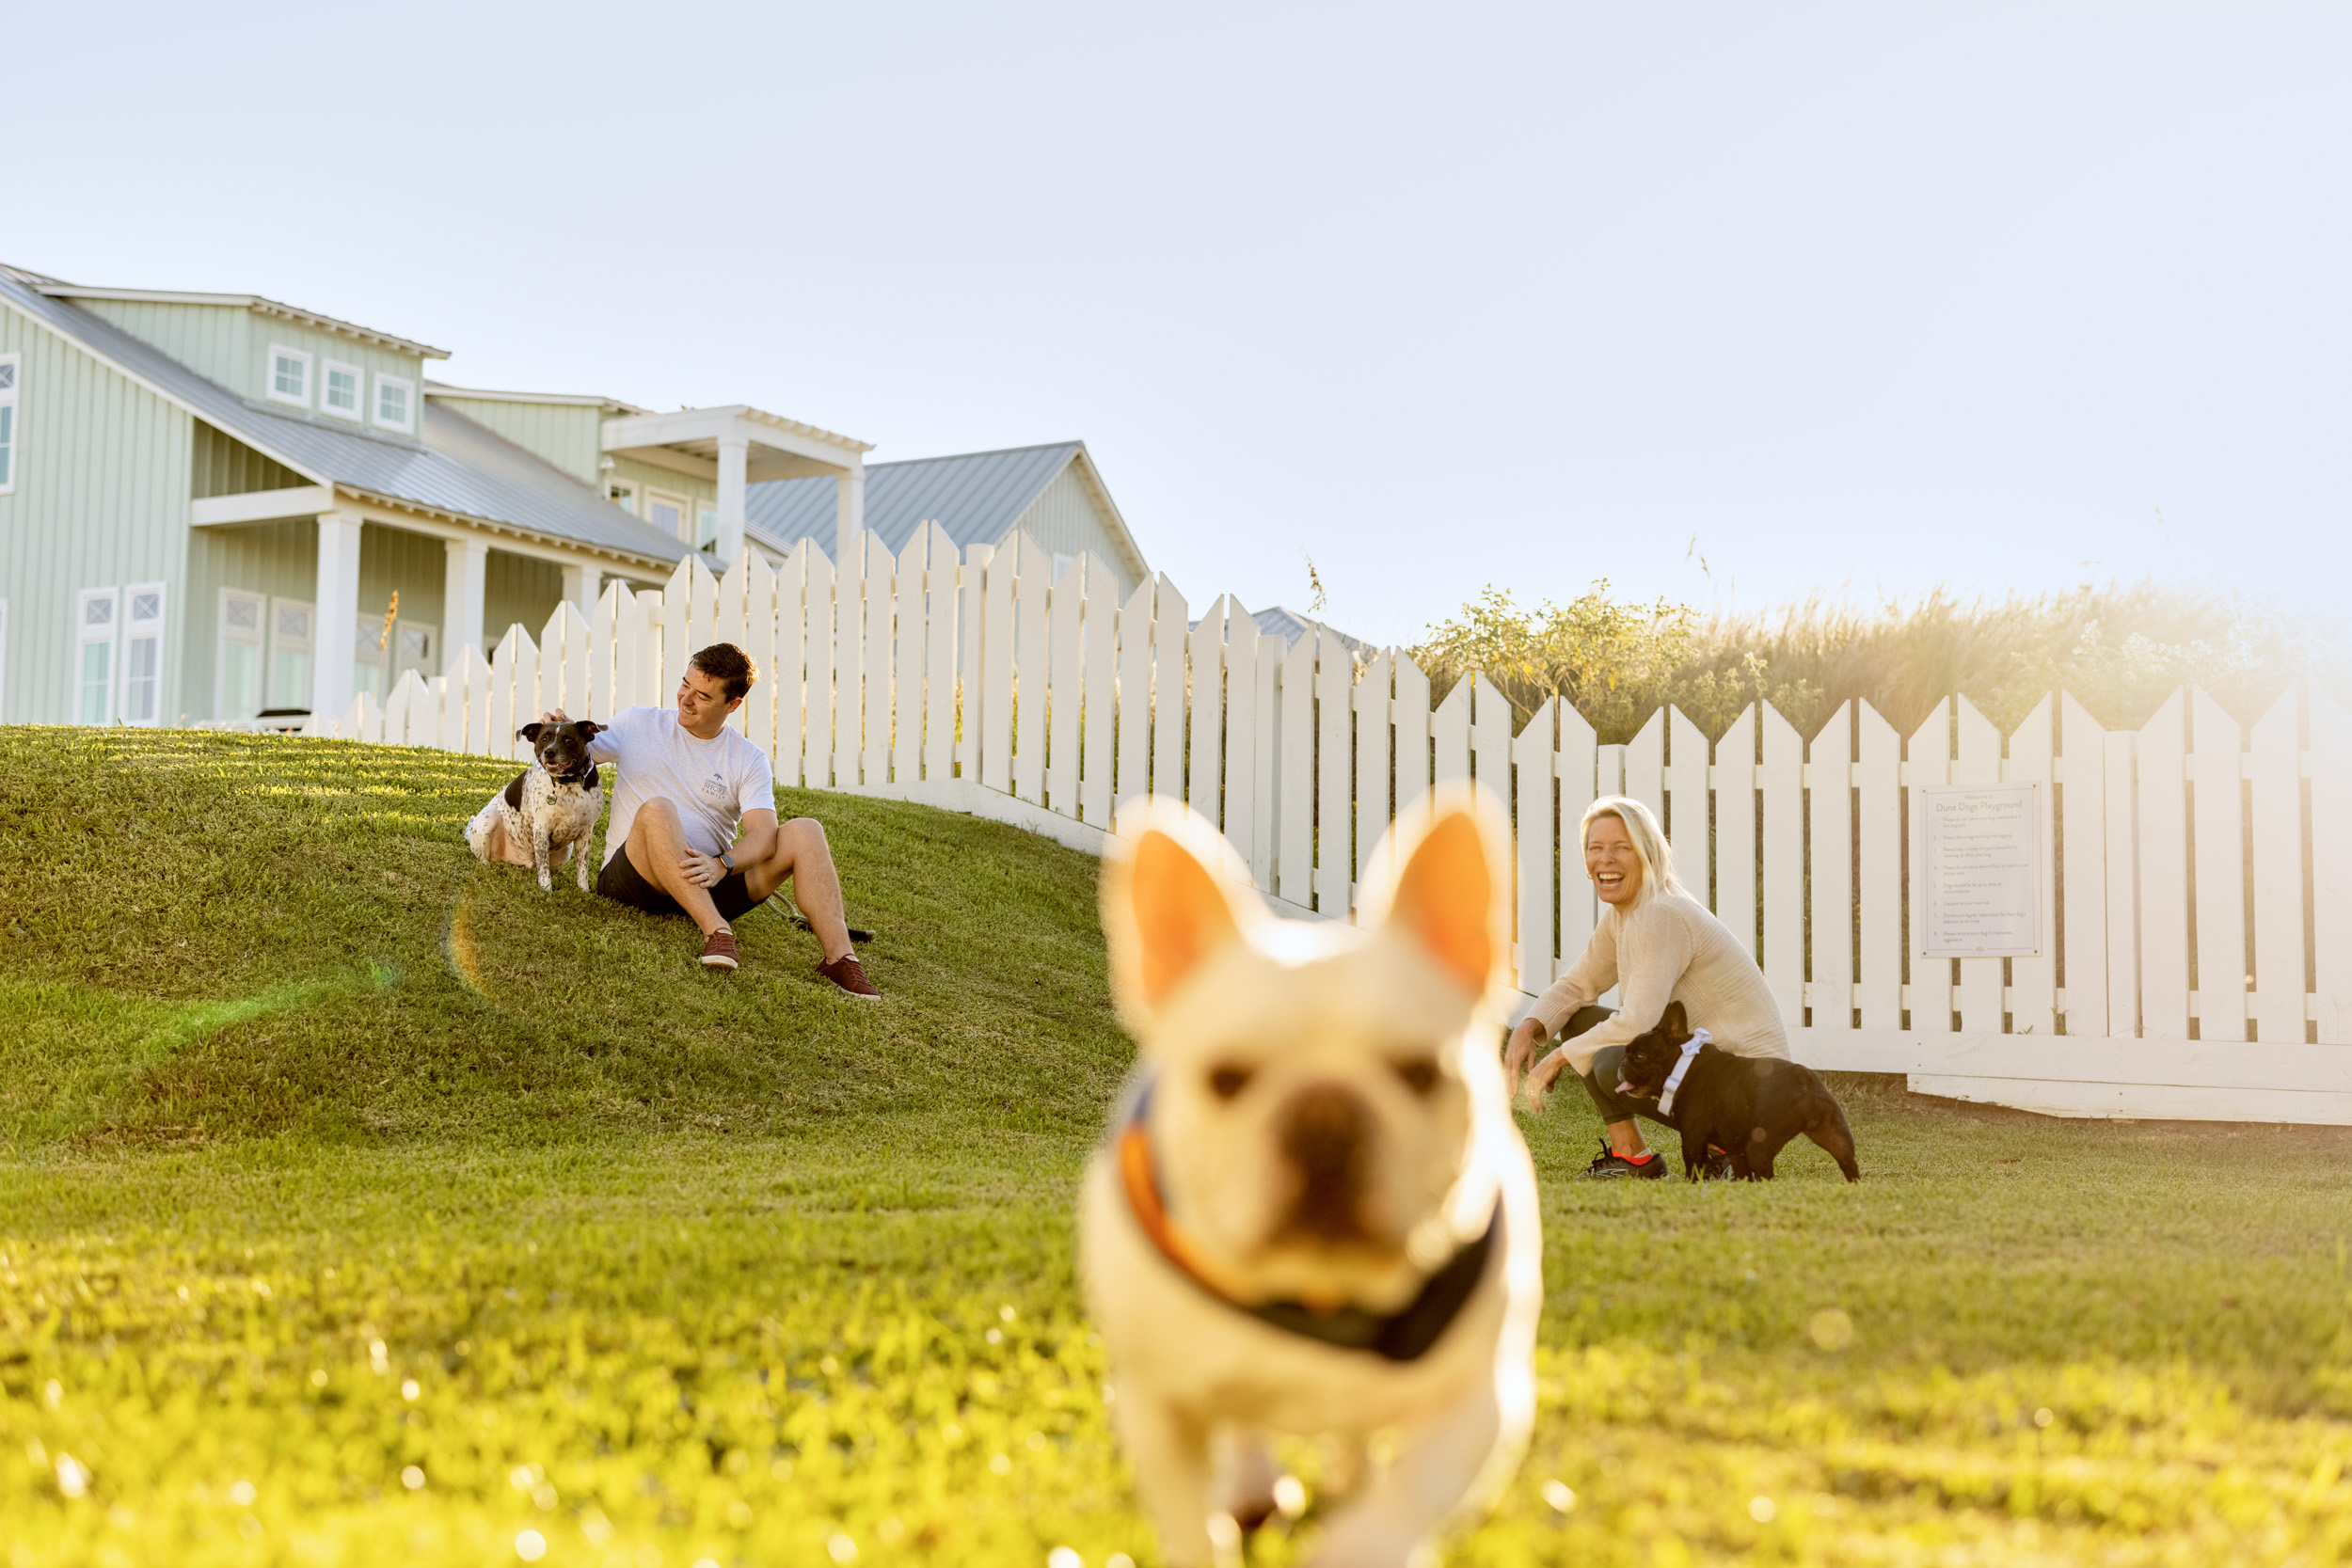 people and dogs at dog park with white picket fence